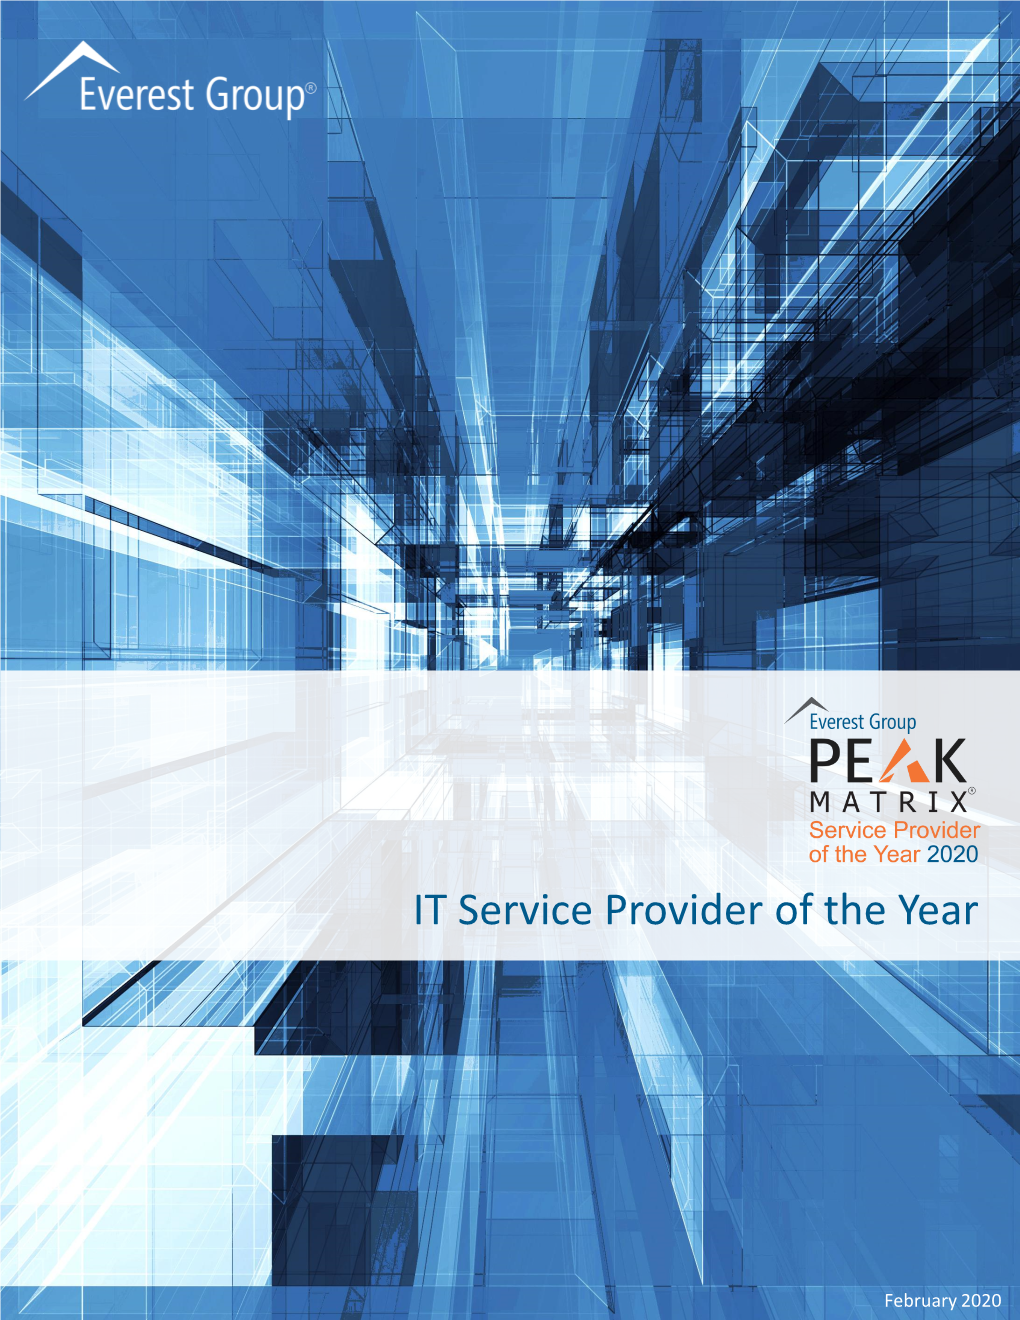 Everest Group Published 26 PEAK Matrix® IT Services Evaluations Featuring 108 Service Providers Across All Evaluations